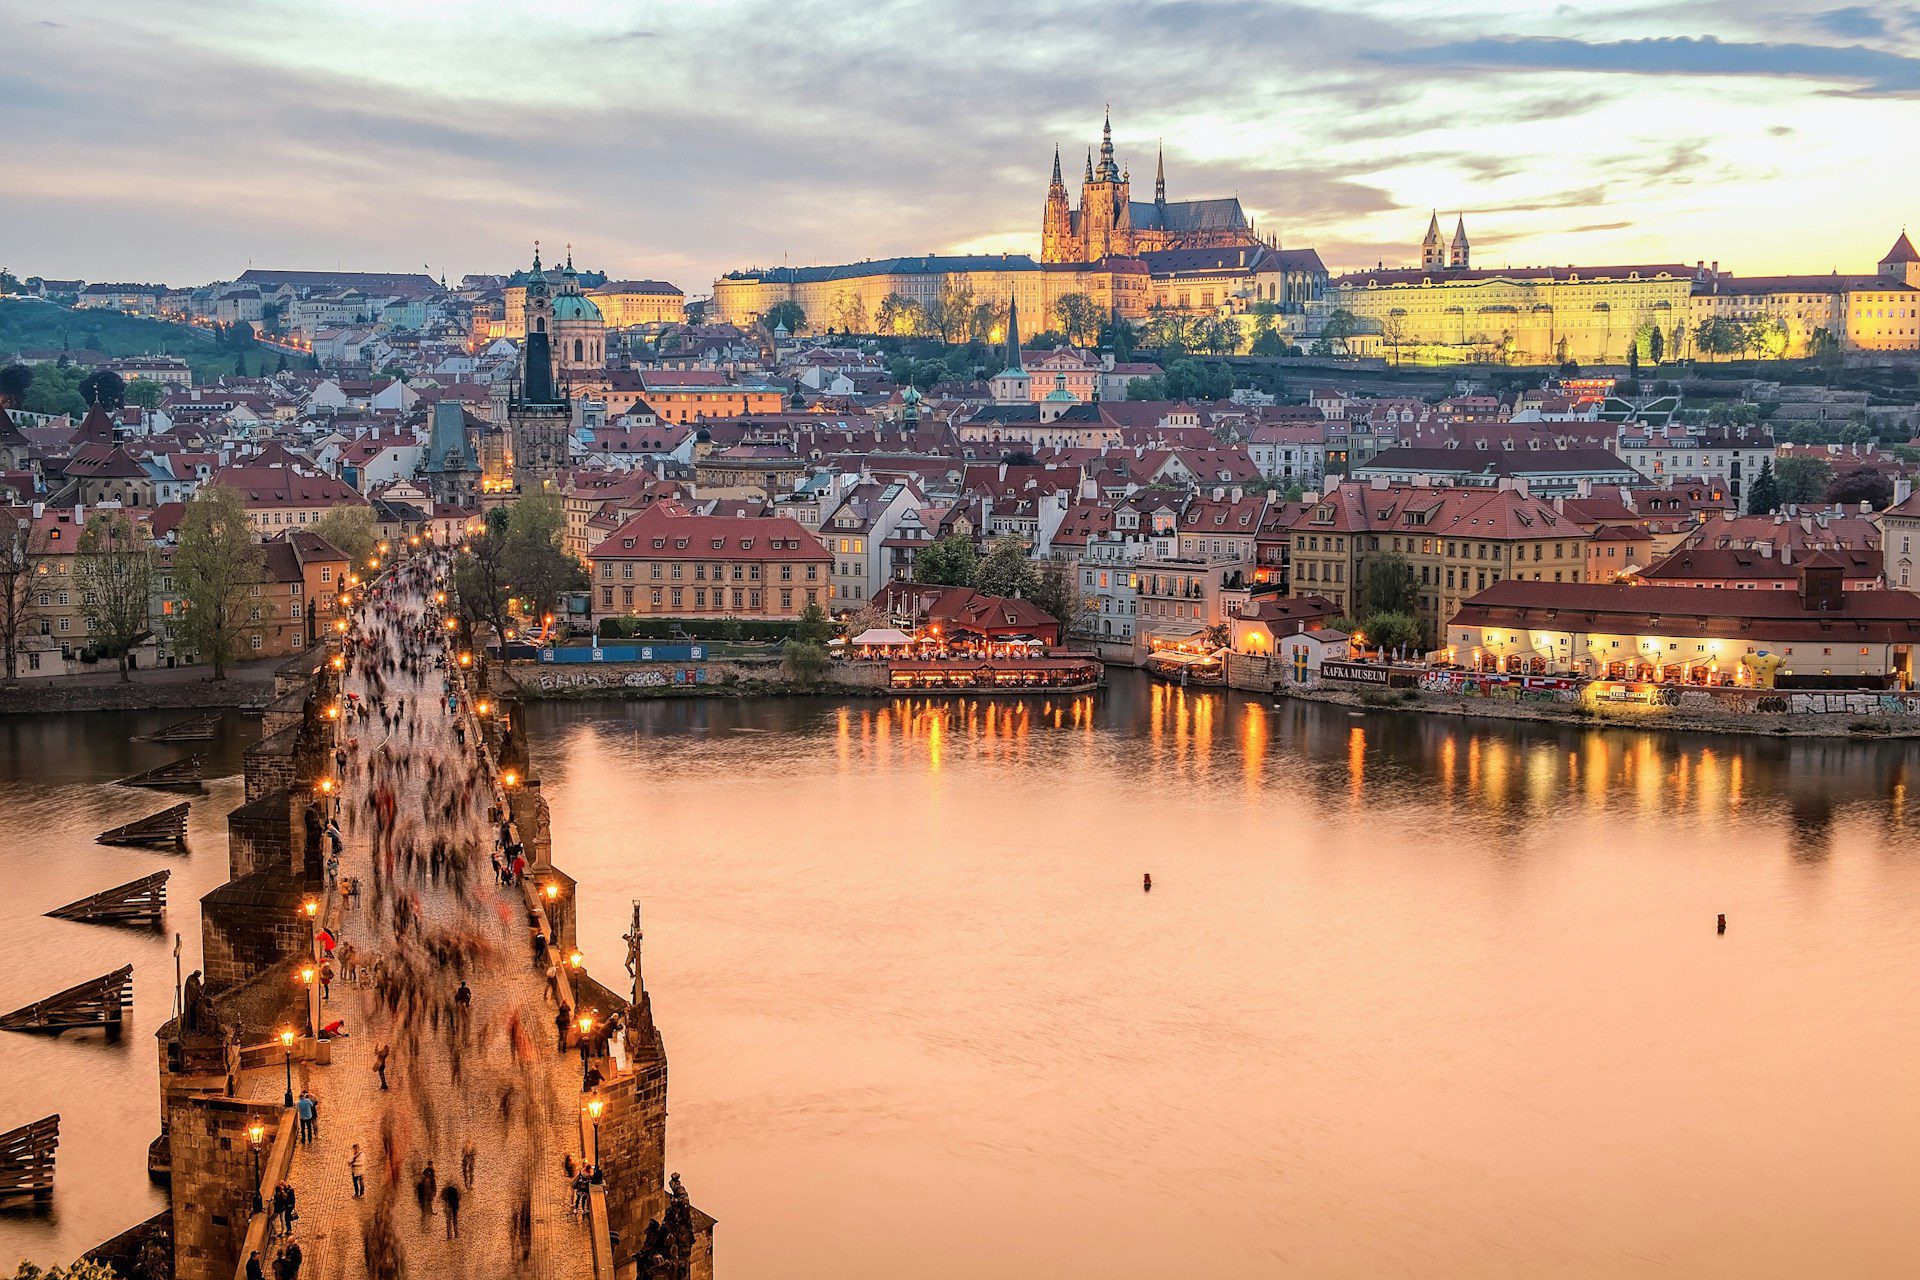 View of Charles Bridge in Prague city centre in the evening, with a body of water on the right and the city up ahead.